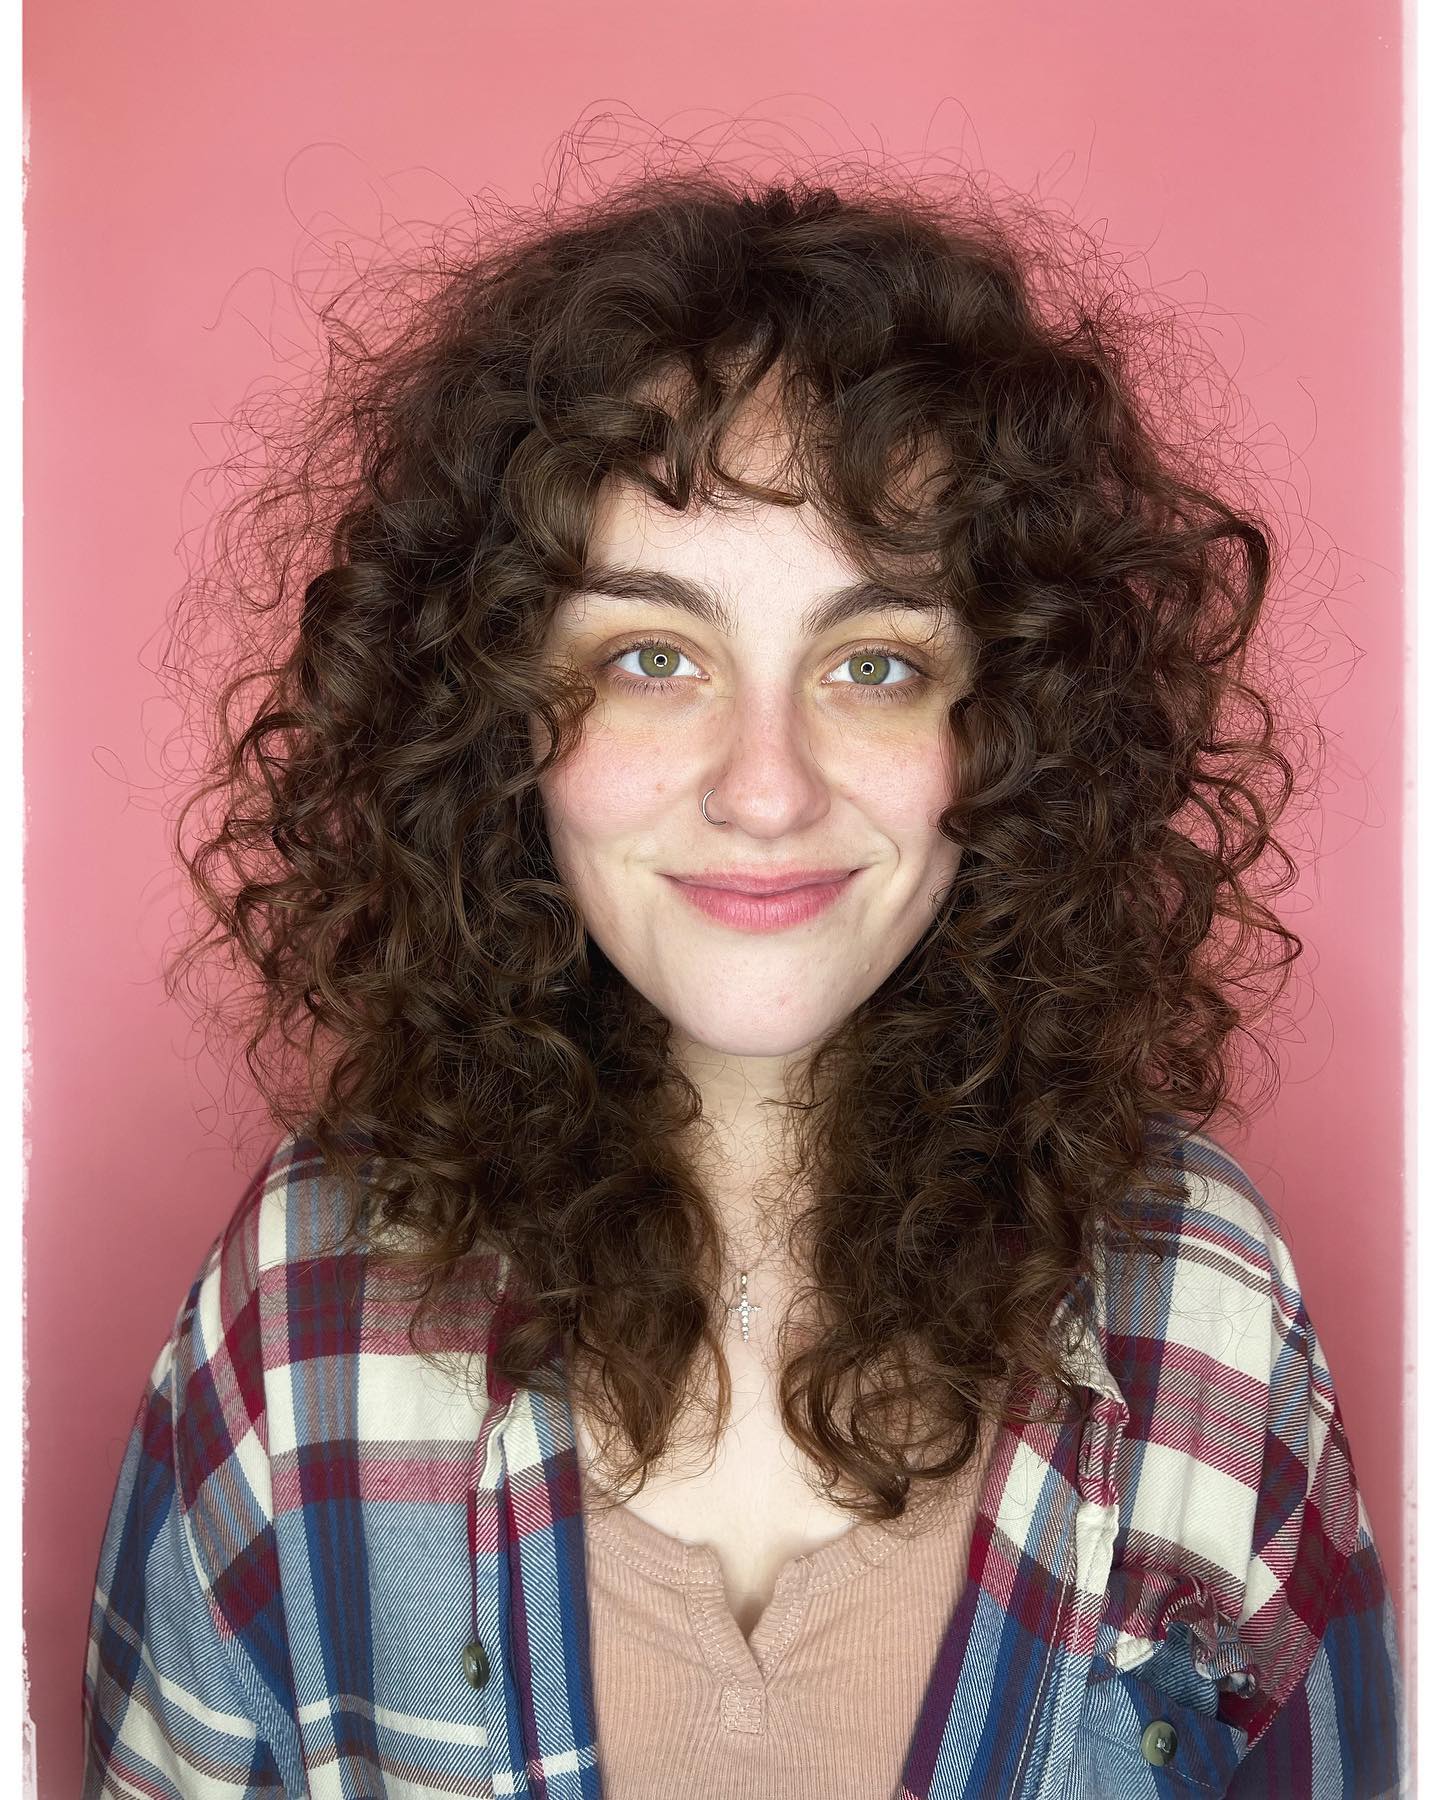 Curly Shag Hairstyle 70 Curly hair shaggy bob | Curly shag mullet | Medium length curly shags Curly Shag Hairstyles for Women